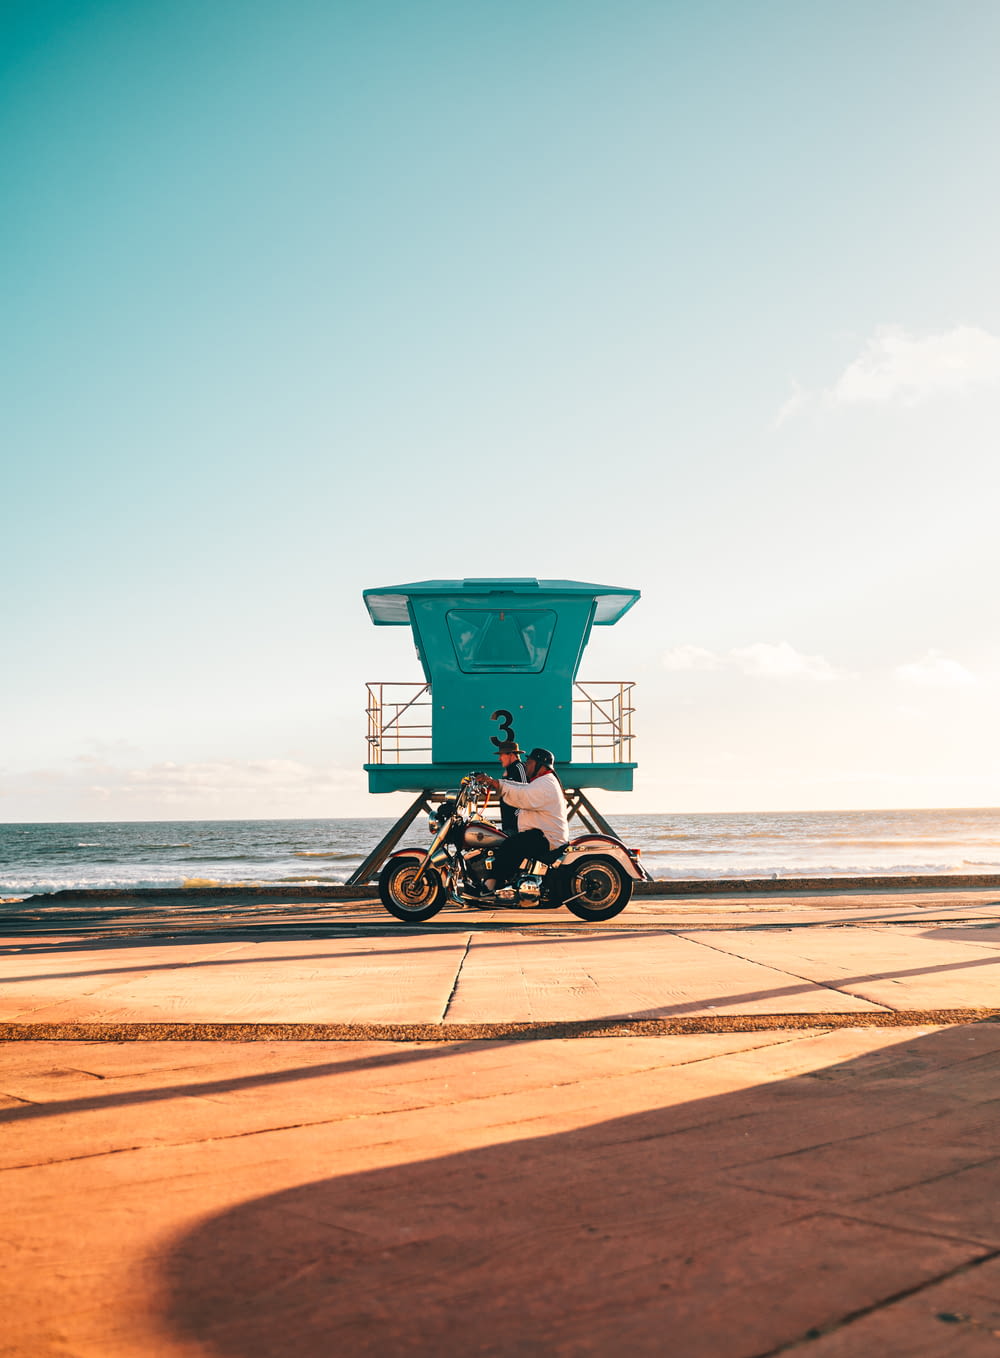 a motorcycle parked in front of a life guard tower